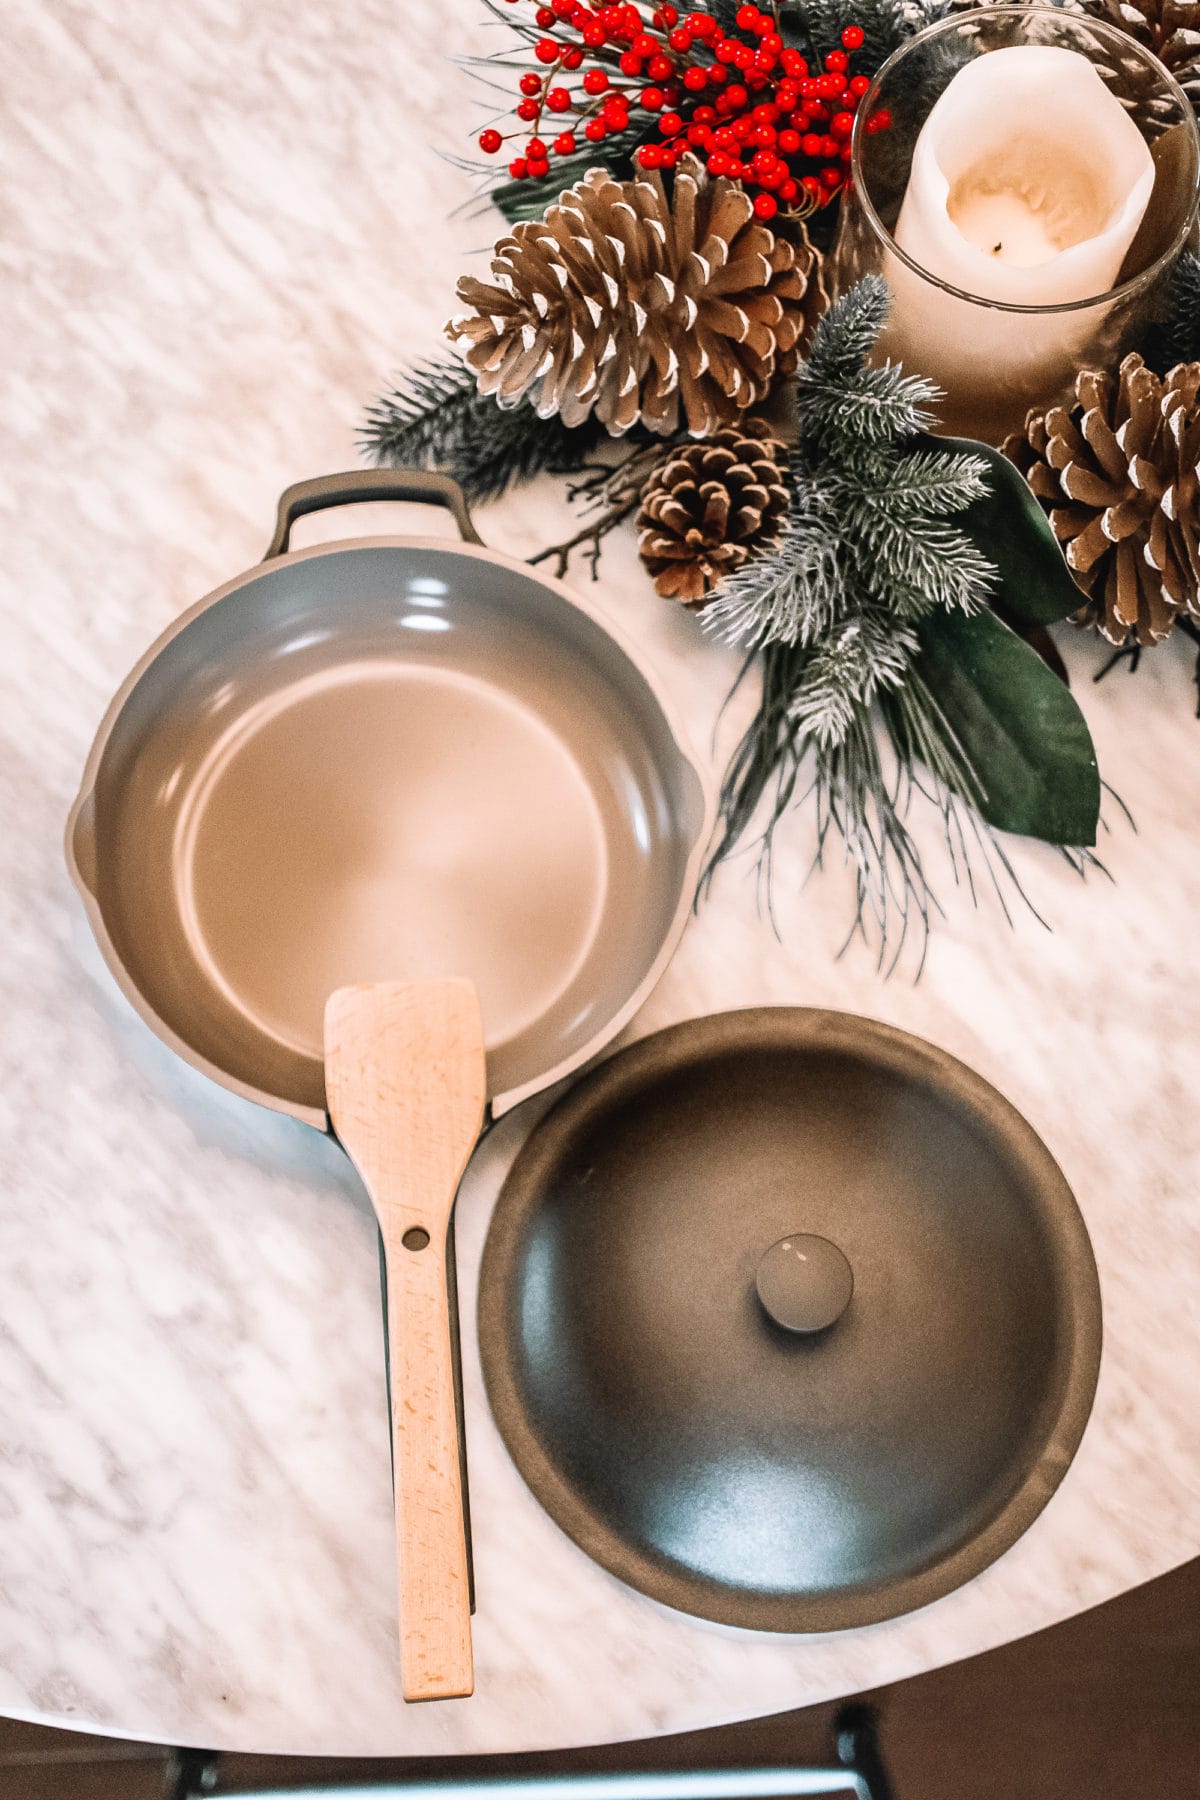 Our Place Cookware Review: What Happens When The Always Pan